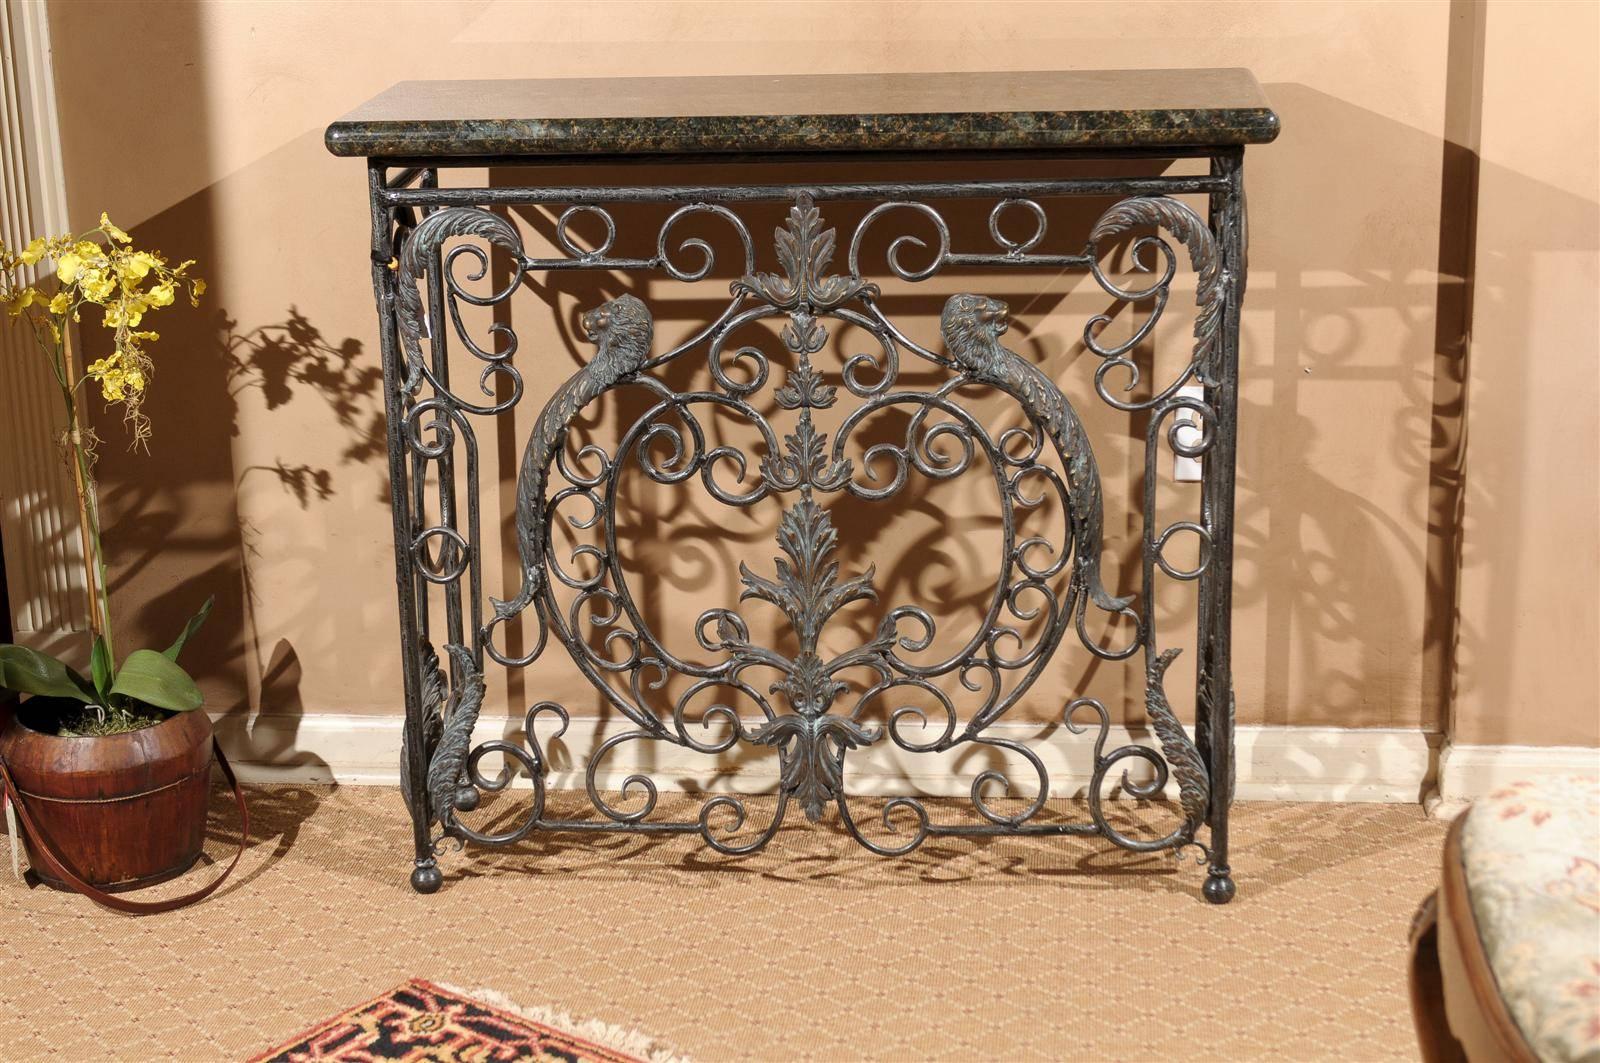 A beautiful piece of granite is supported by a wonderful iron base. The ornate front has two lion heads as the focal point. There is ornamental scrolling down the sides and an open back. It is a nice size which makes it possible to use in a variety